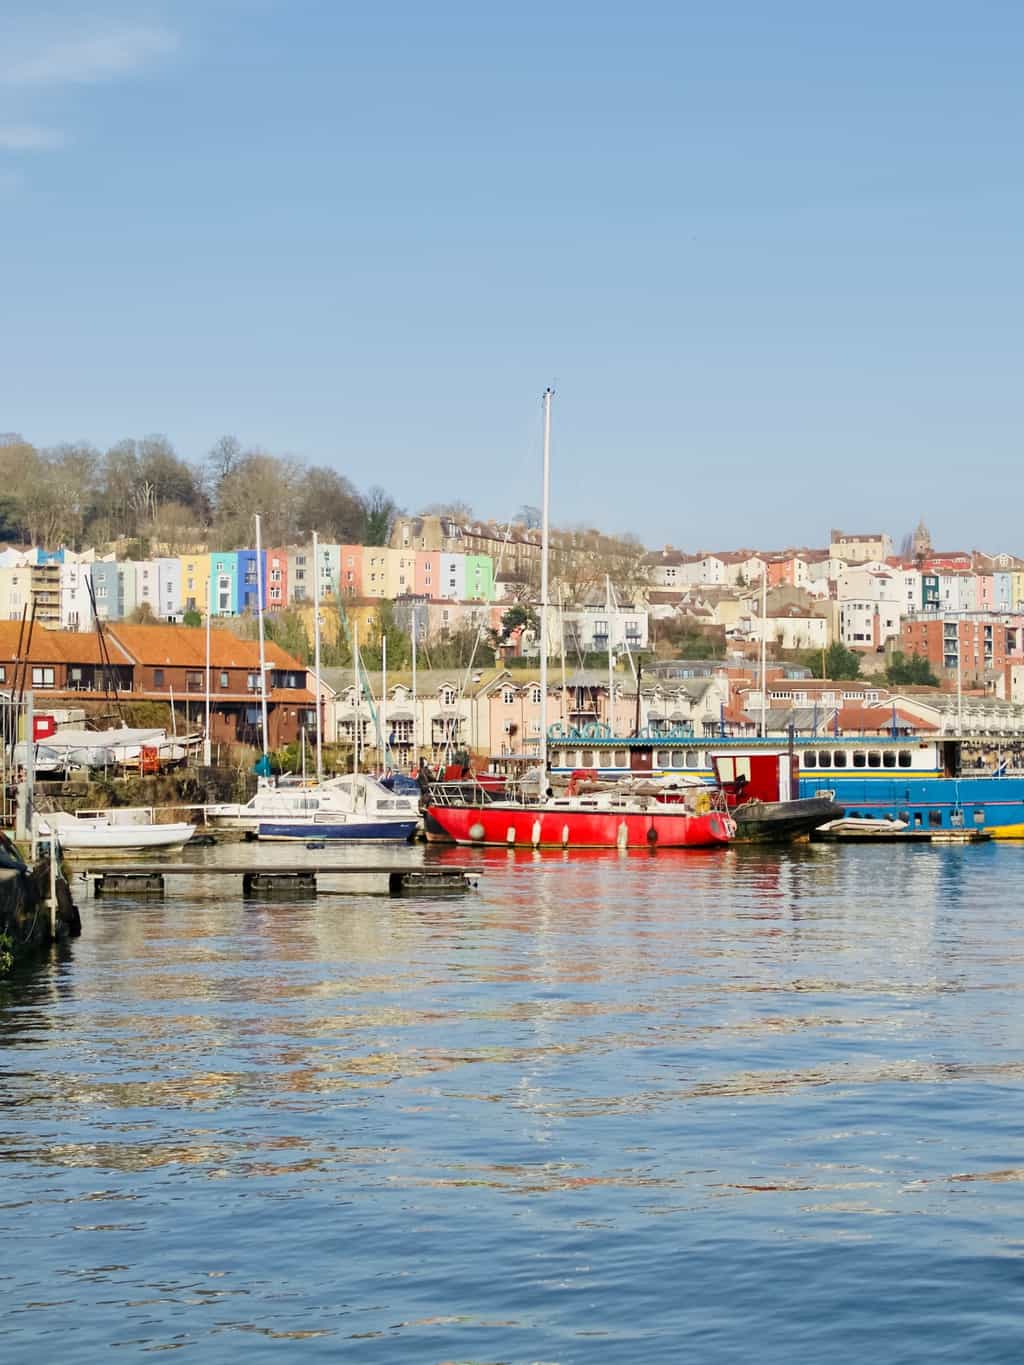 Our city break in Bristol with kids